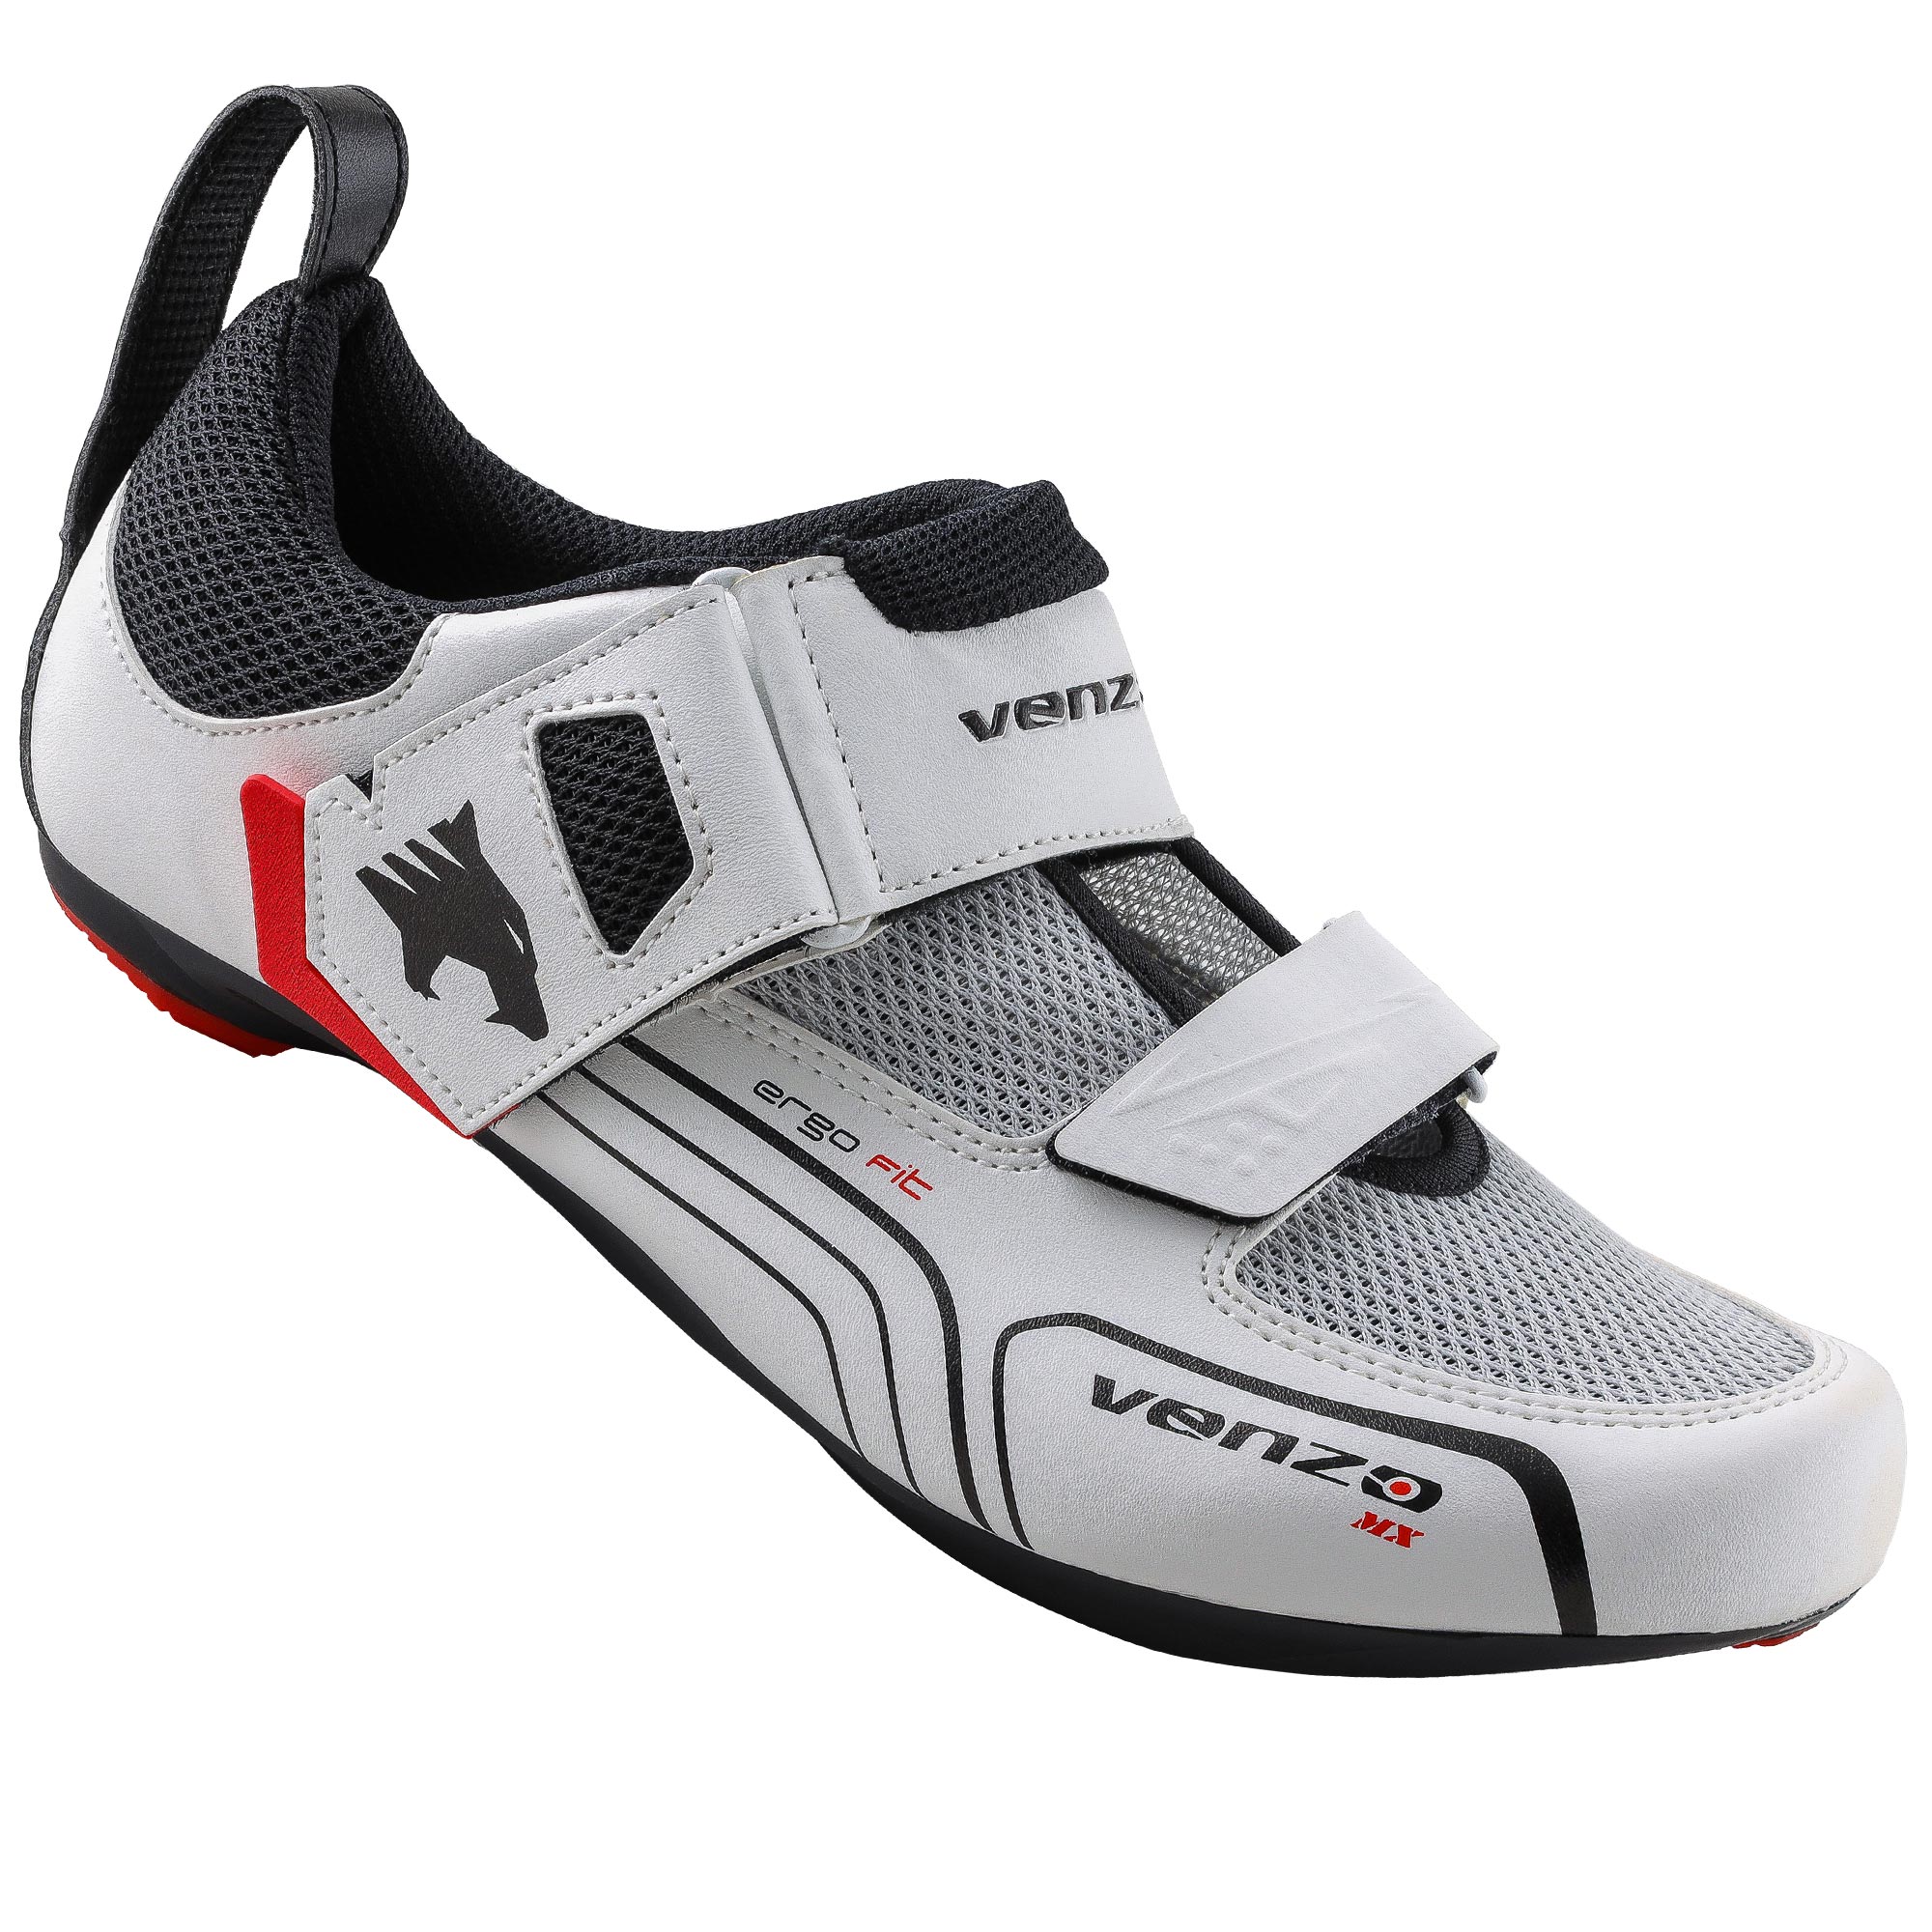 Venzo Cycling Bicycle Triathlon Road Bike Shoes For Shimano SPD SL Look White 48 